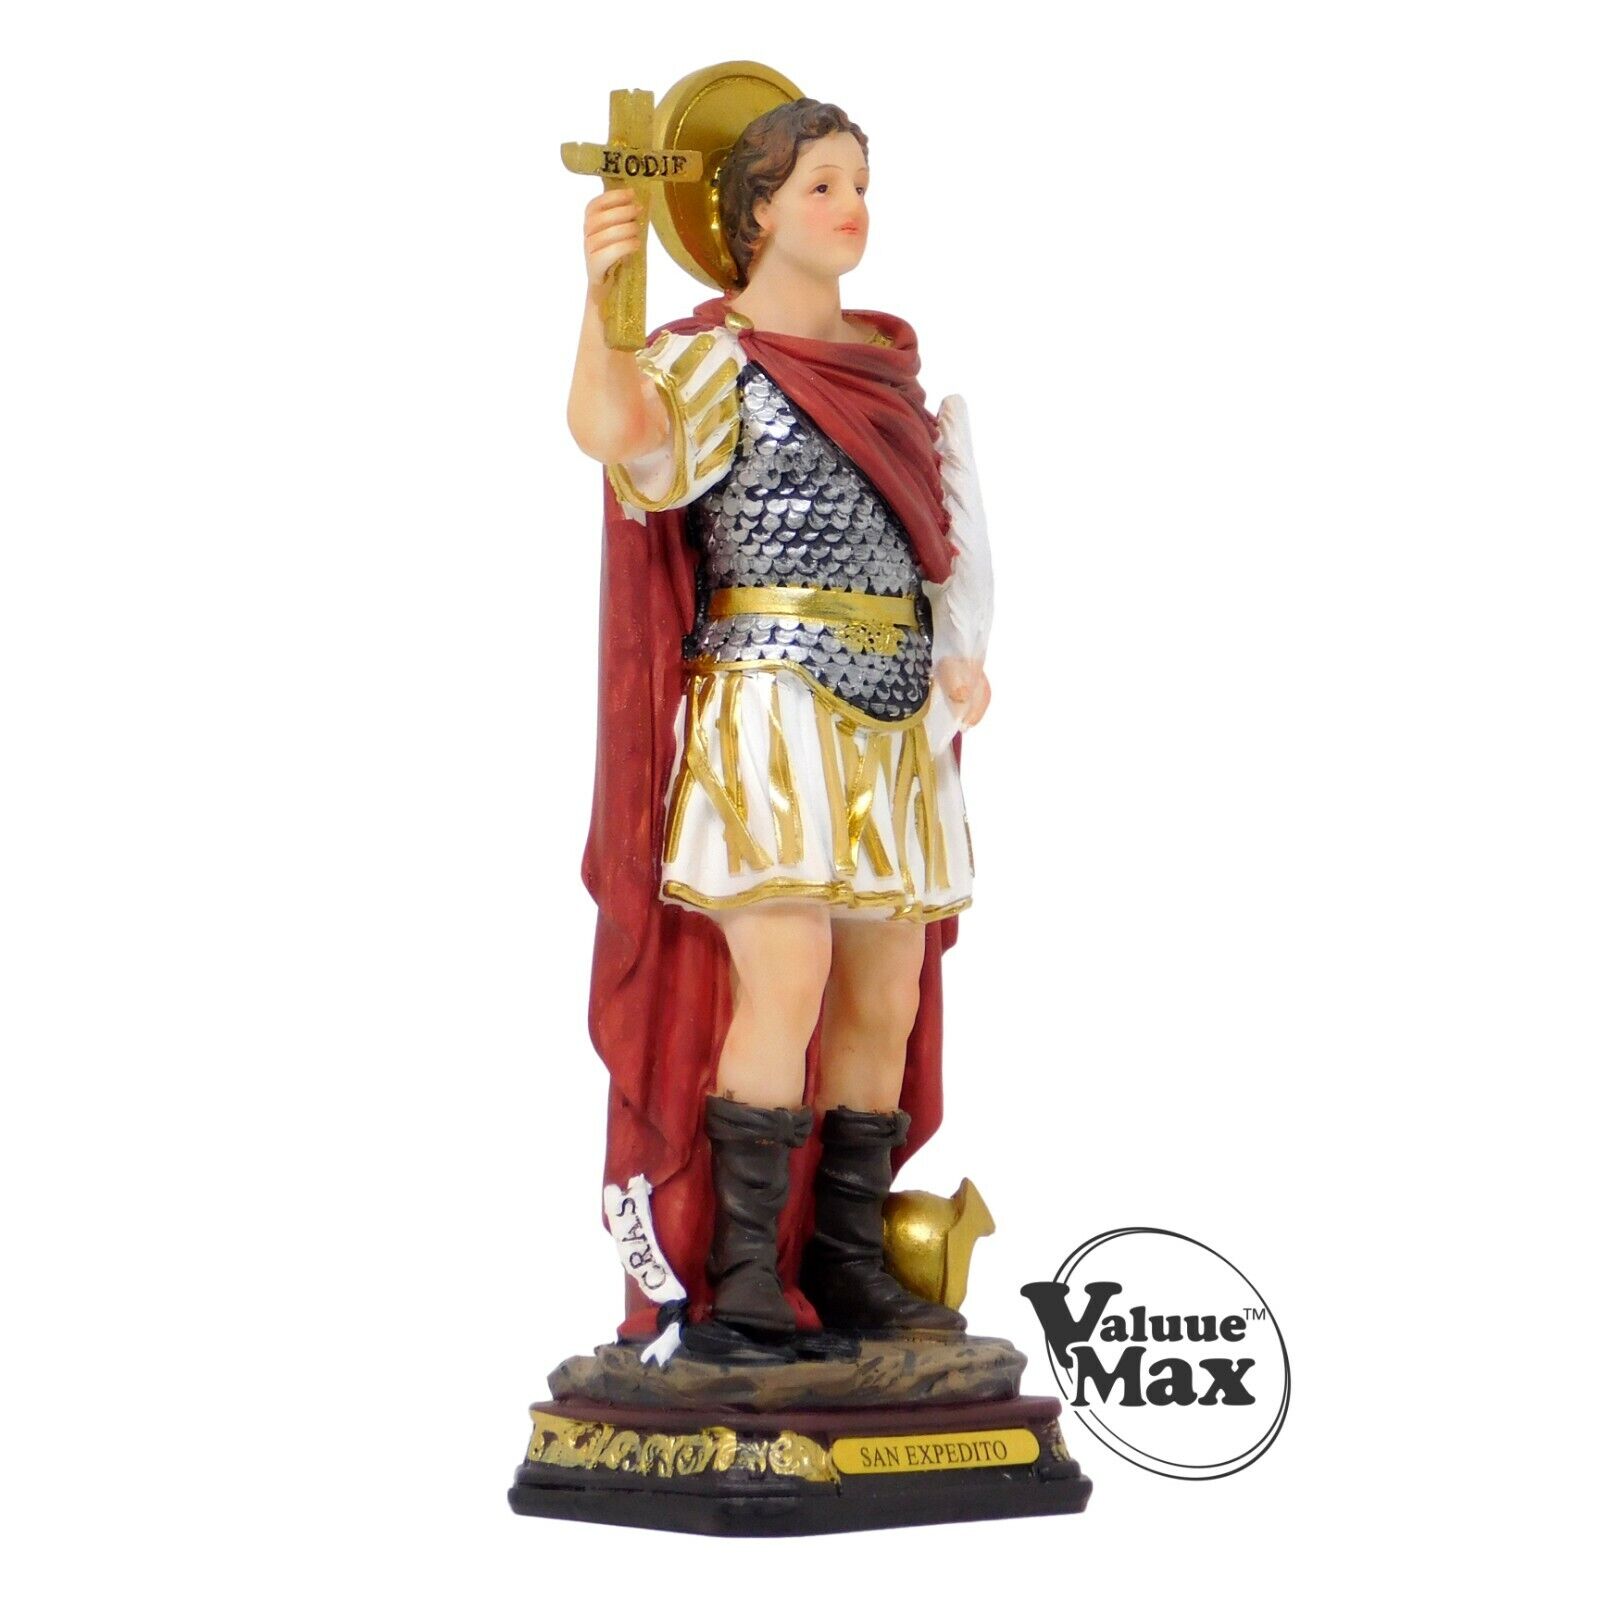 ValuueMax™ Saint Expedito Statue, Finely Detailed Resin, 8 Inch Tall Figurine